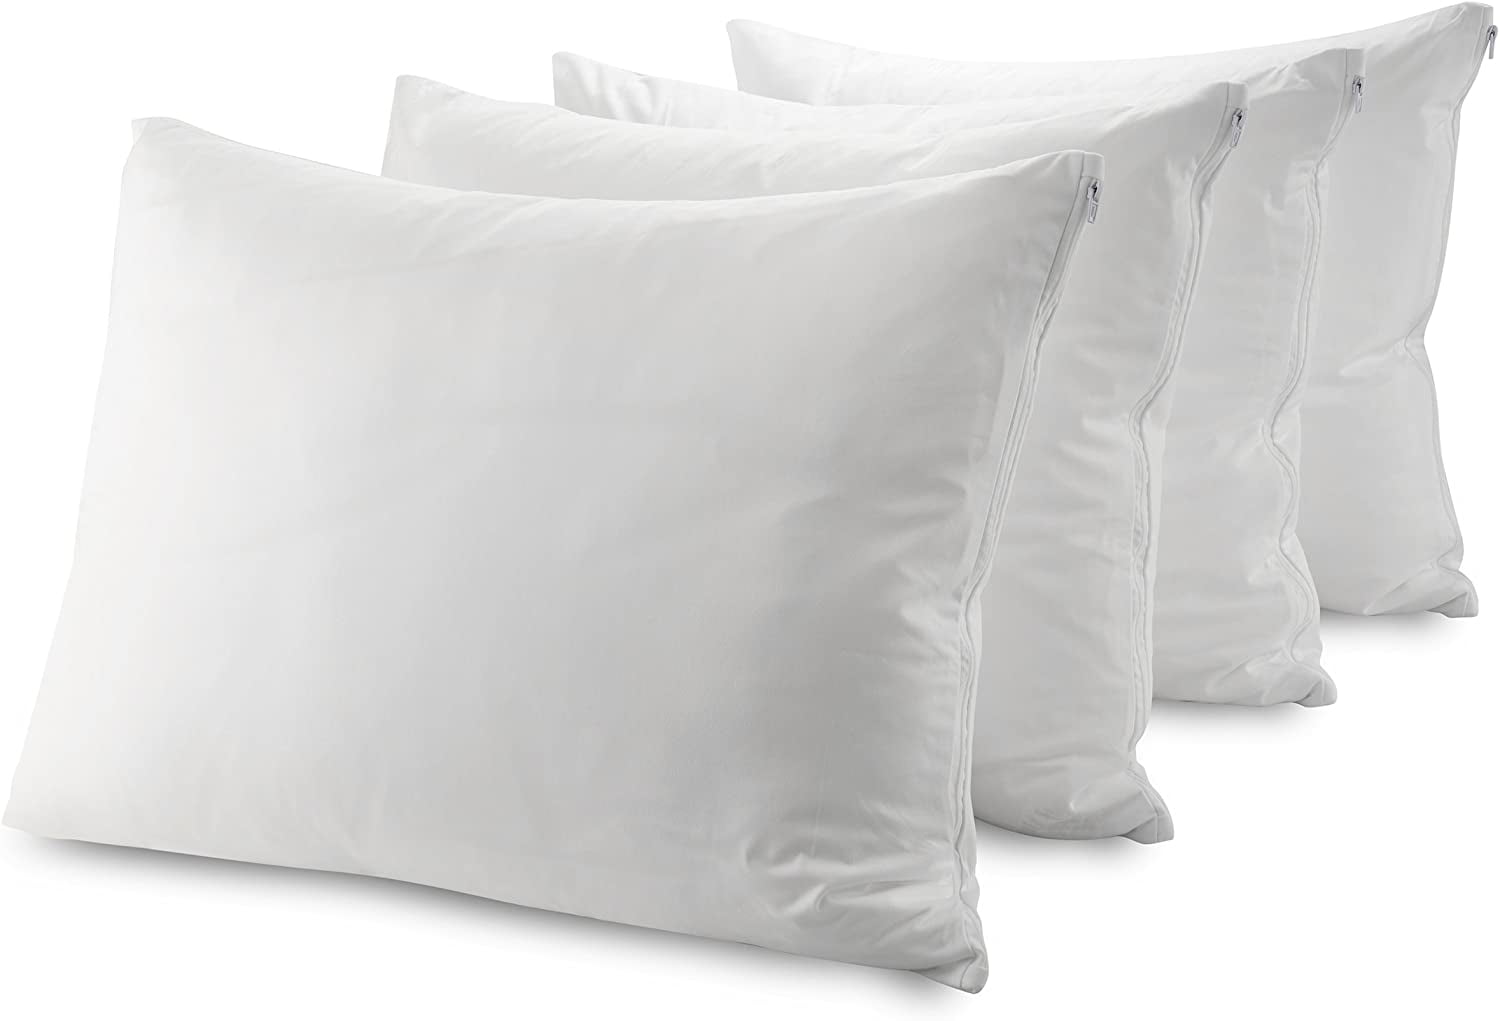 Details about   Cotton Pillow Protectors Standard 20x26" Zippered Covers Breathable 4 Pack New